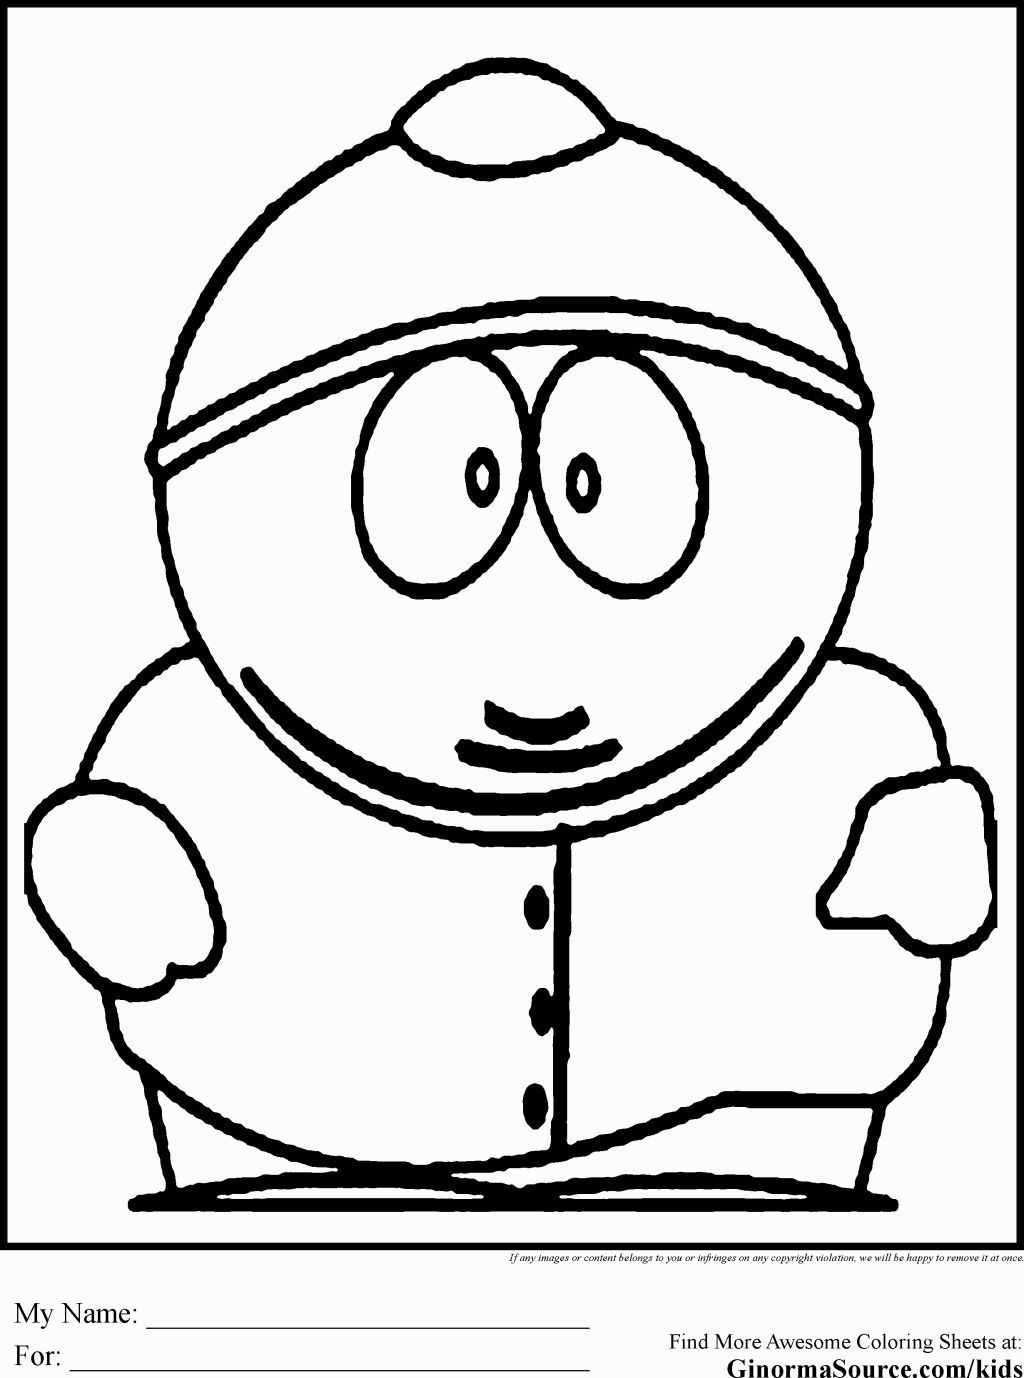 Printable South Park Coloring Pages - Coloring Home - Free Printable South Park Coloring Pages